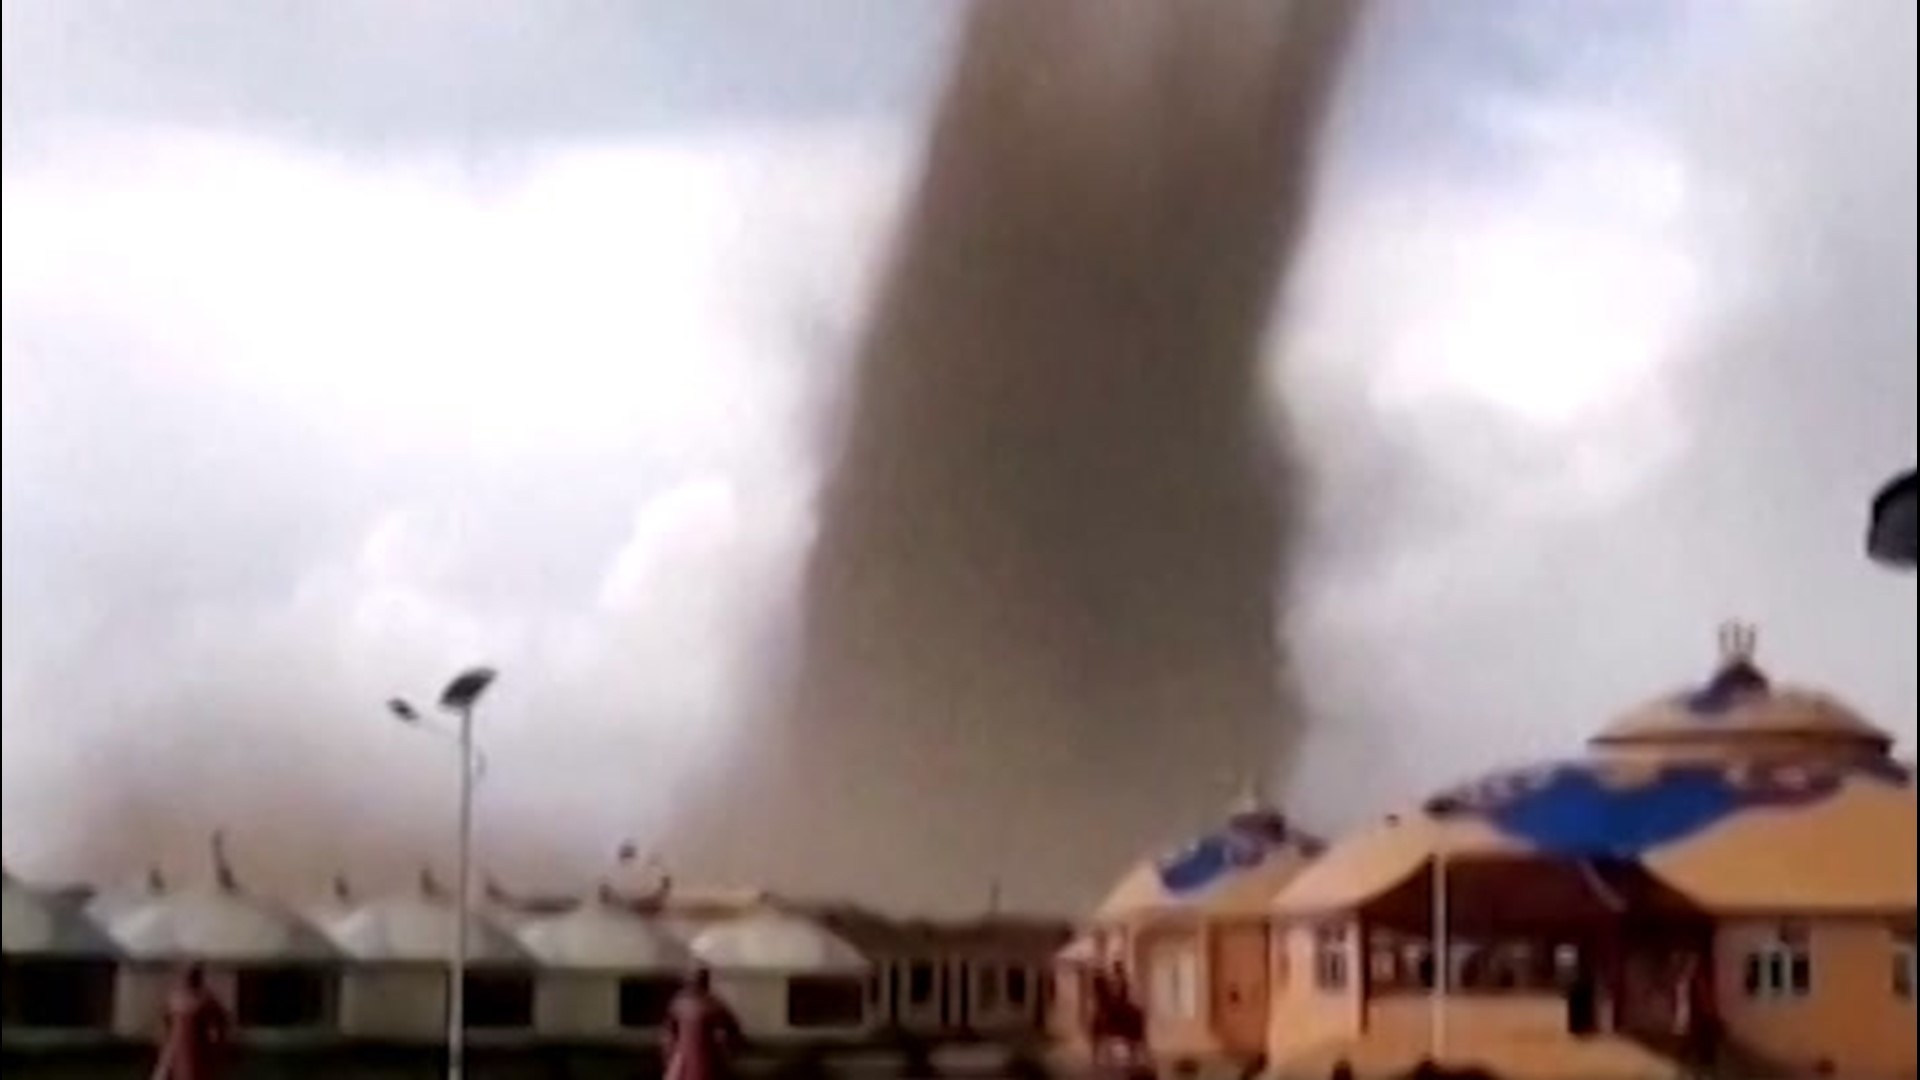 A tornado swept through the city of Baotou, China, on Aug. 9, injuring 33 people. This video captures the moment homes got caught inside the tornado.